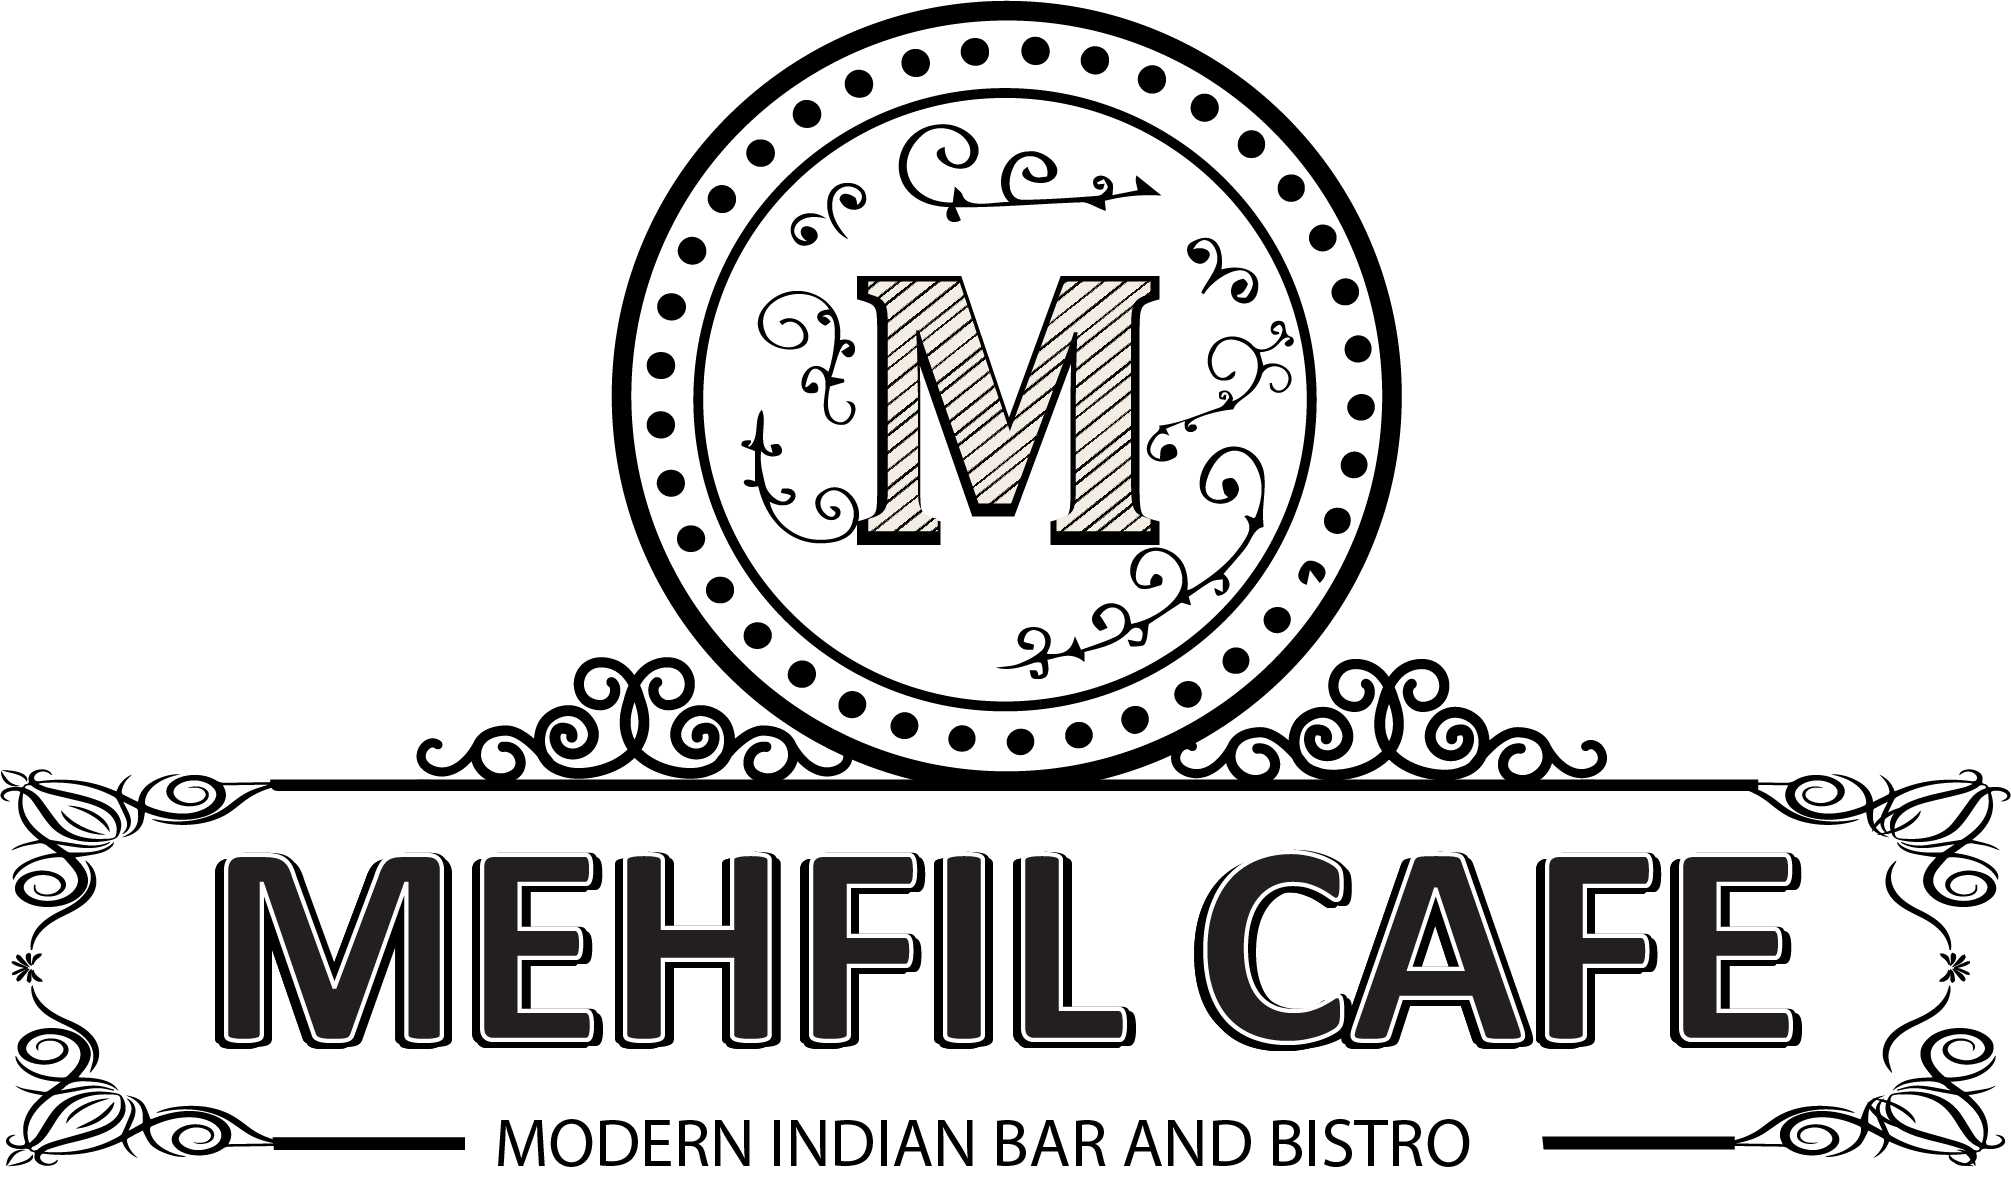 Mehfil Cafe